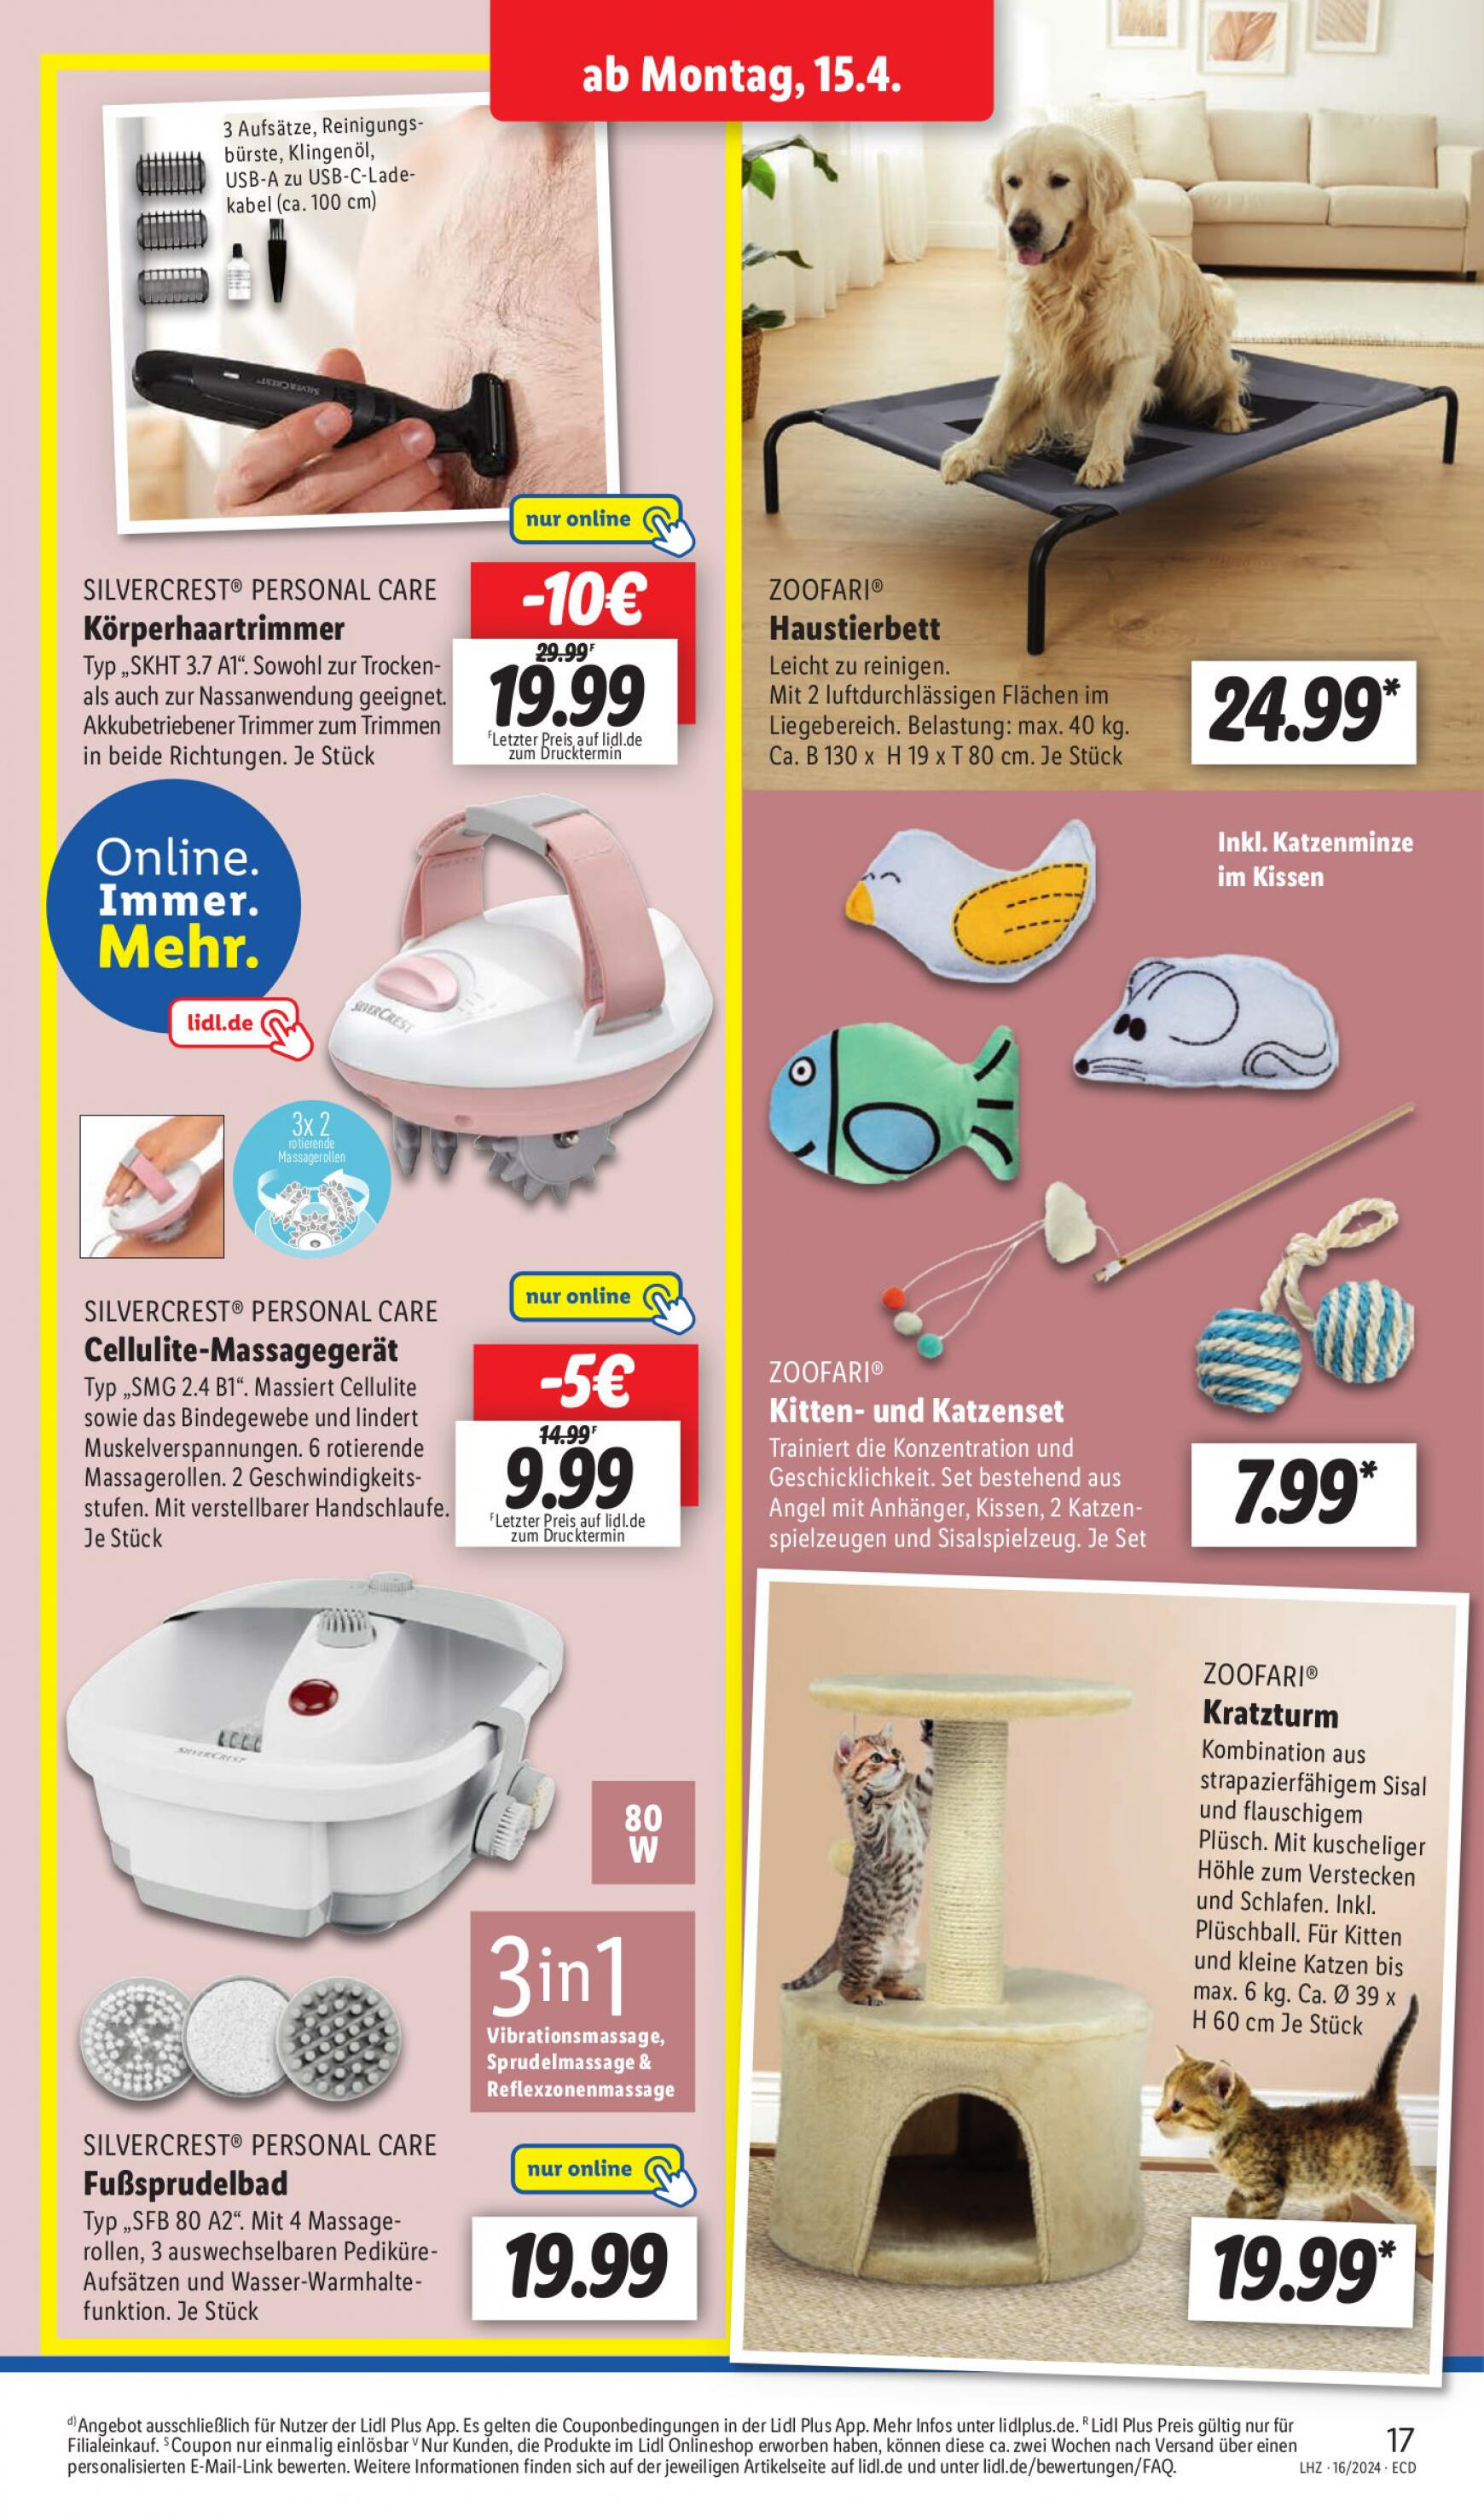 lidl - Flyer Lidl aktuell 15.04. - 20.04. - page: 21